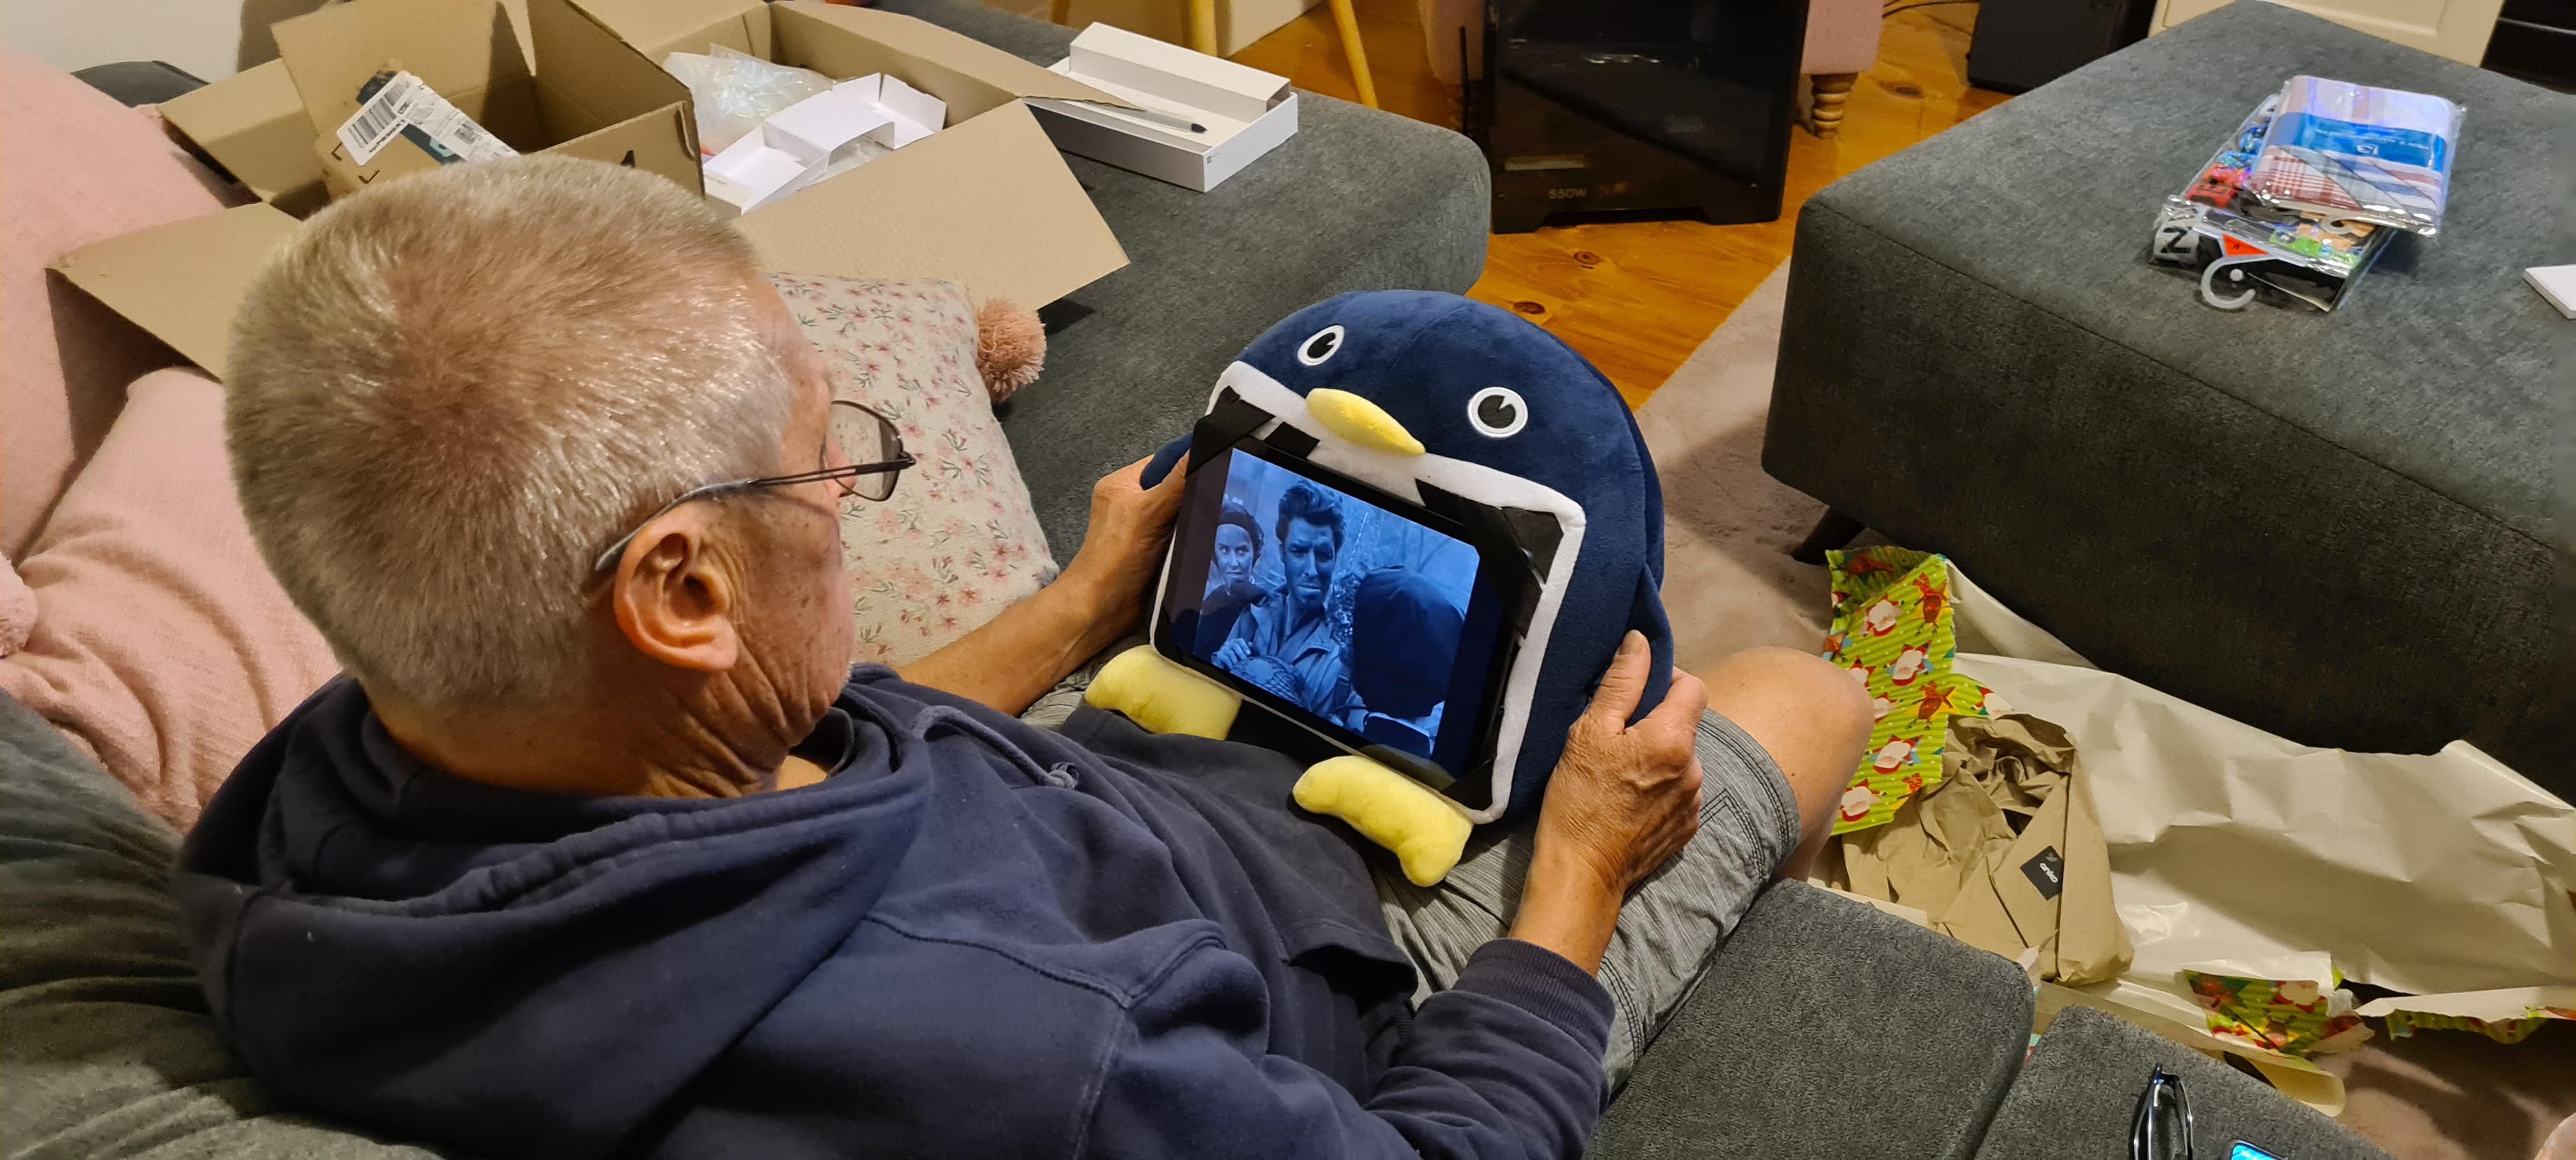 Got my dad a tablet for Christmas, he has CMT and can't grip things too well, so we got him this penguin to help him